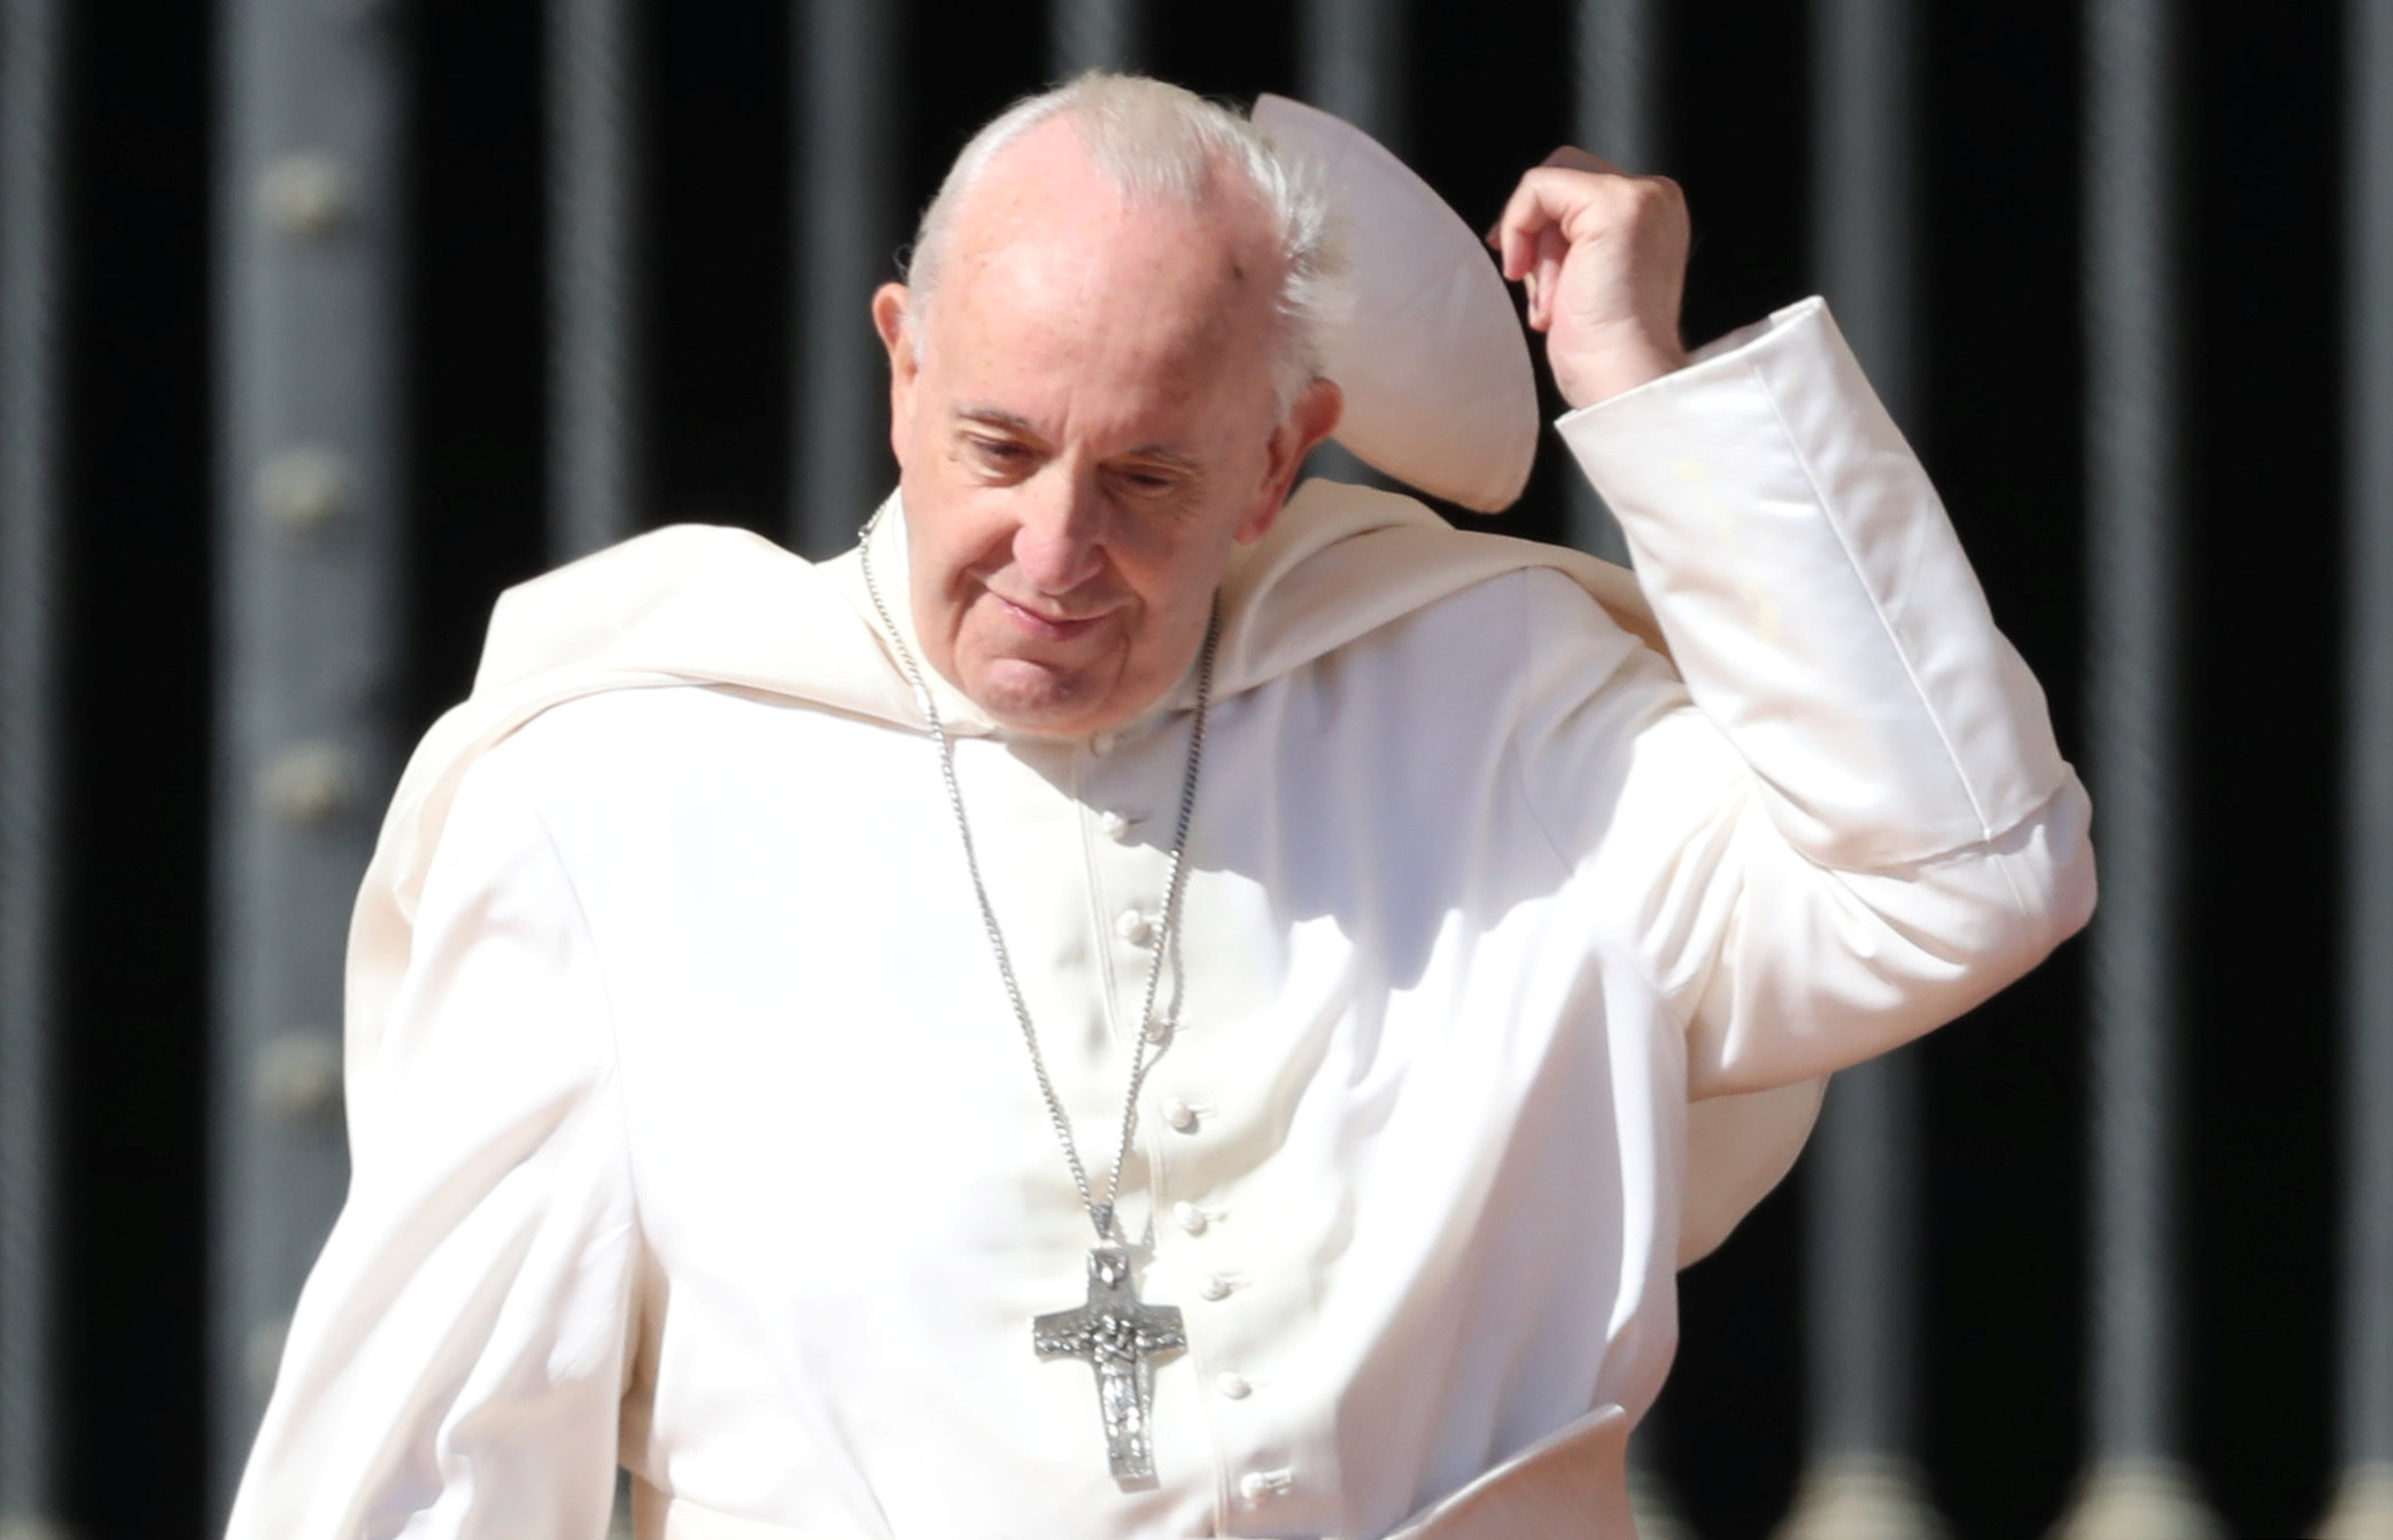 US confidence in Pope Francis falls amid sexual abuse scandal